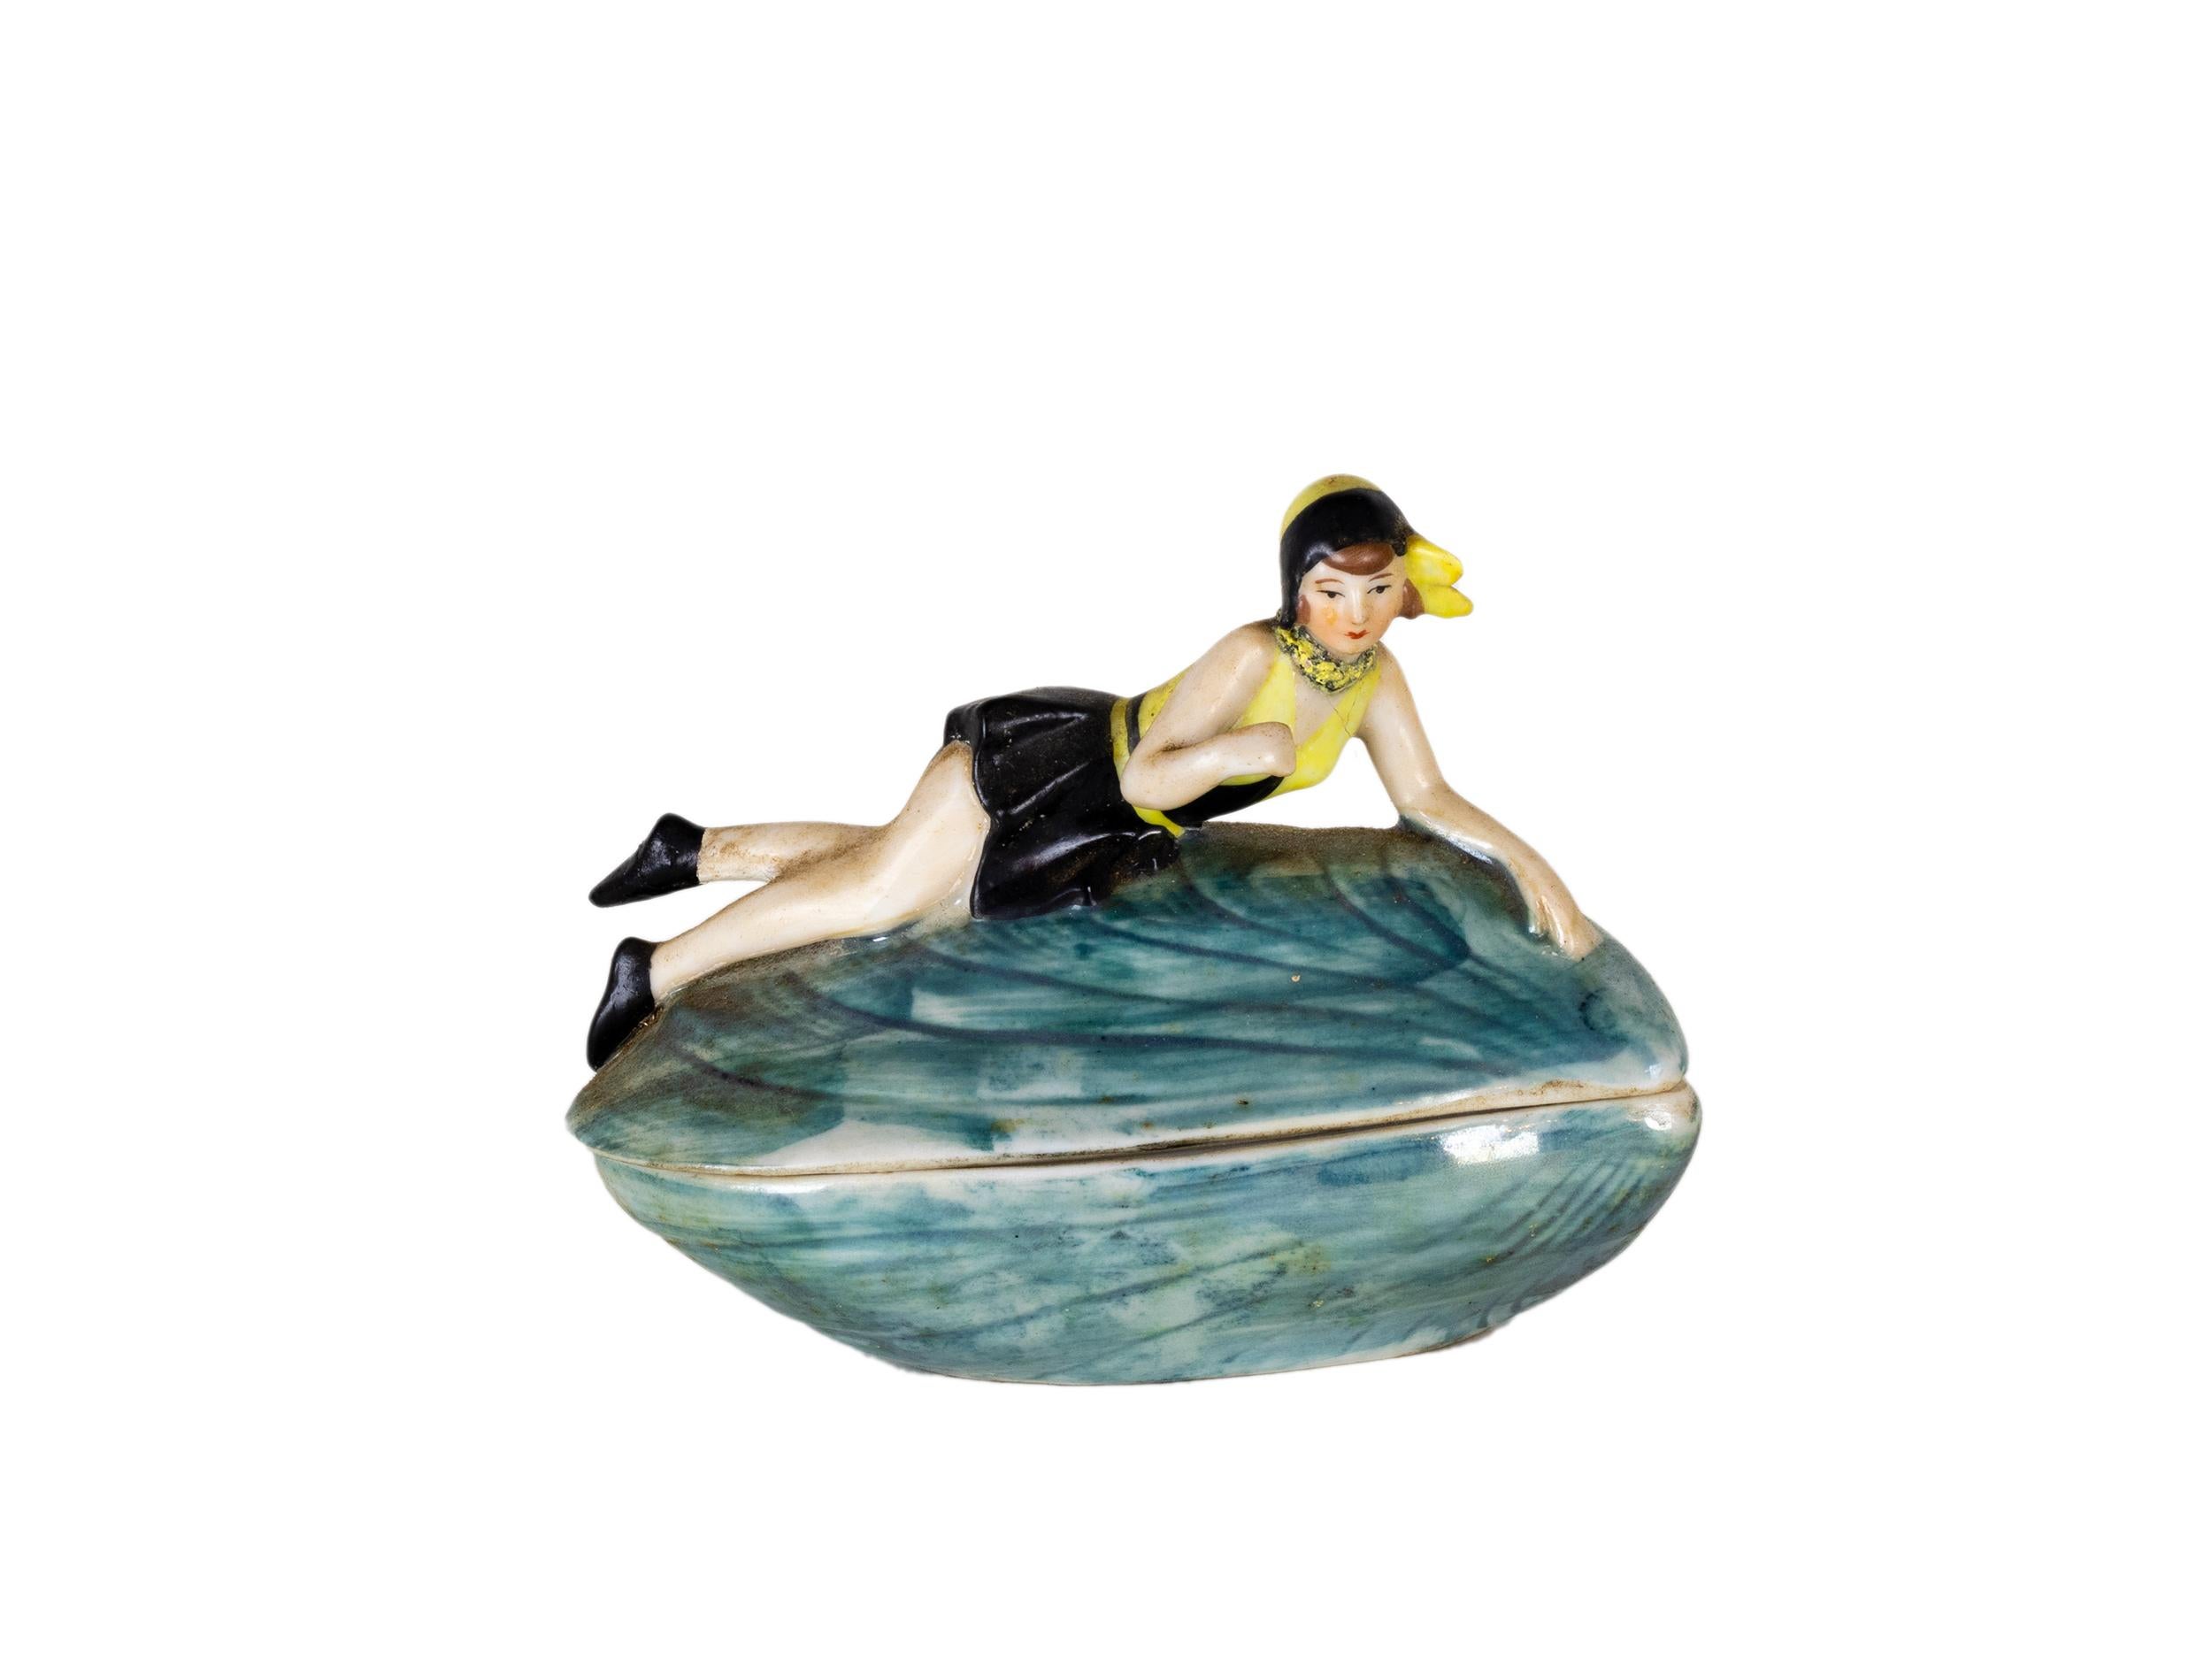 German Art Deco Mussel Shell Rice Powder Box Pin Up Woman Porcelain by Goebel, 1929 For Sale